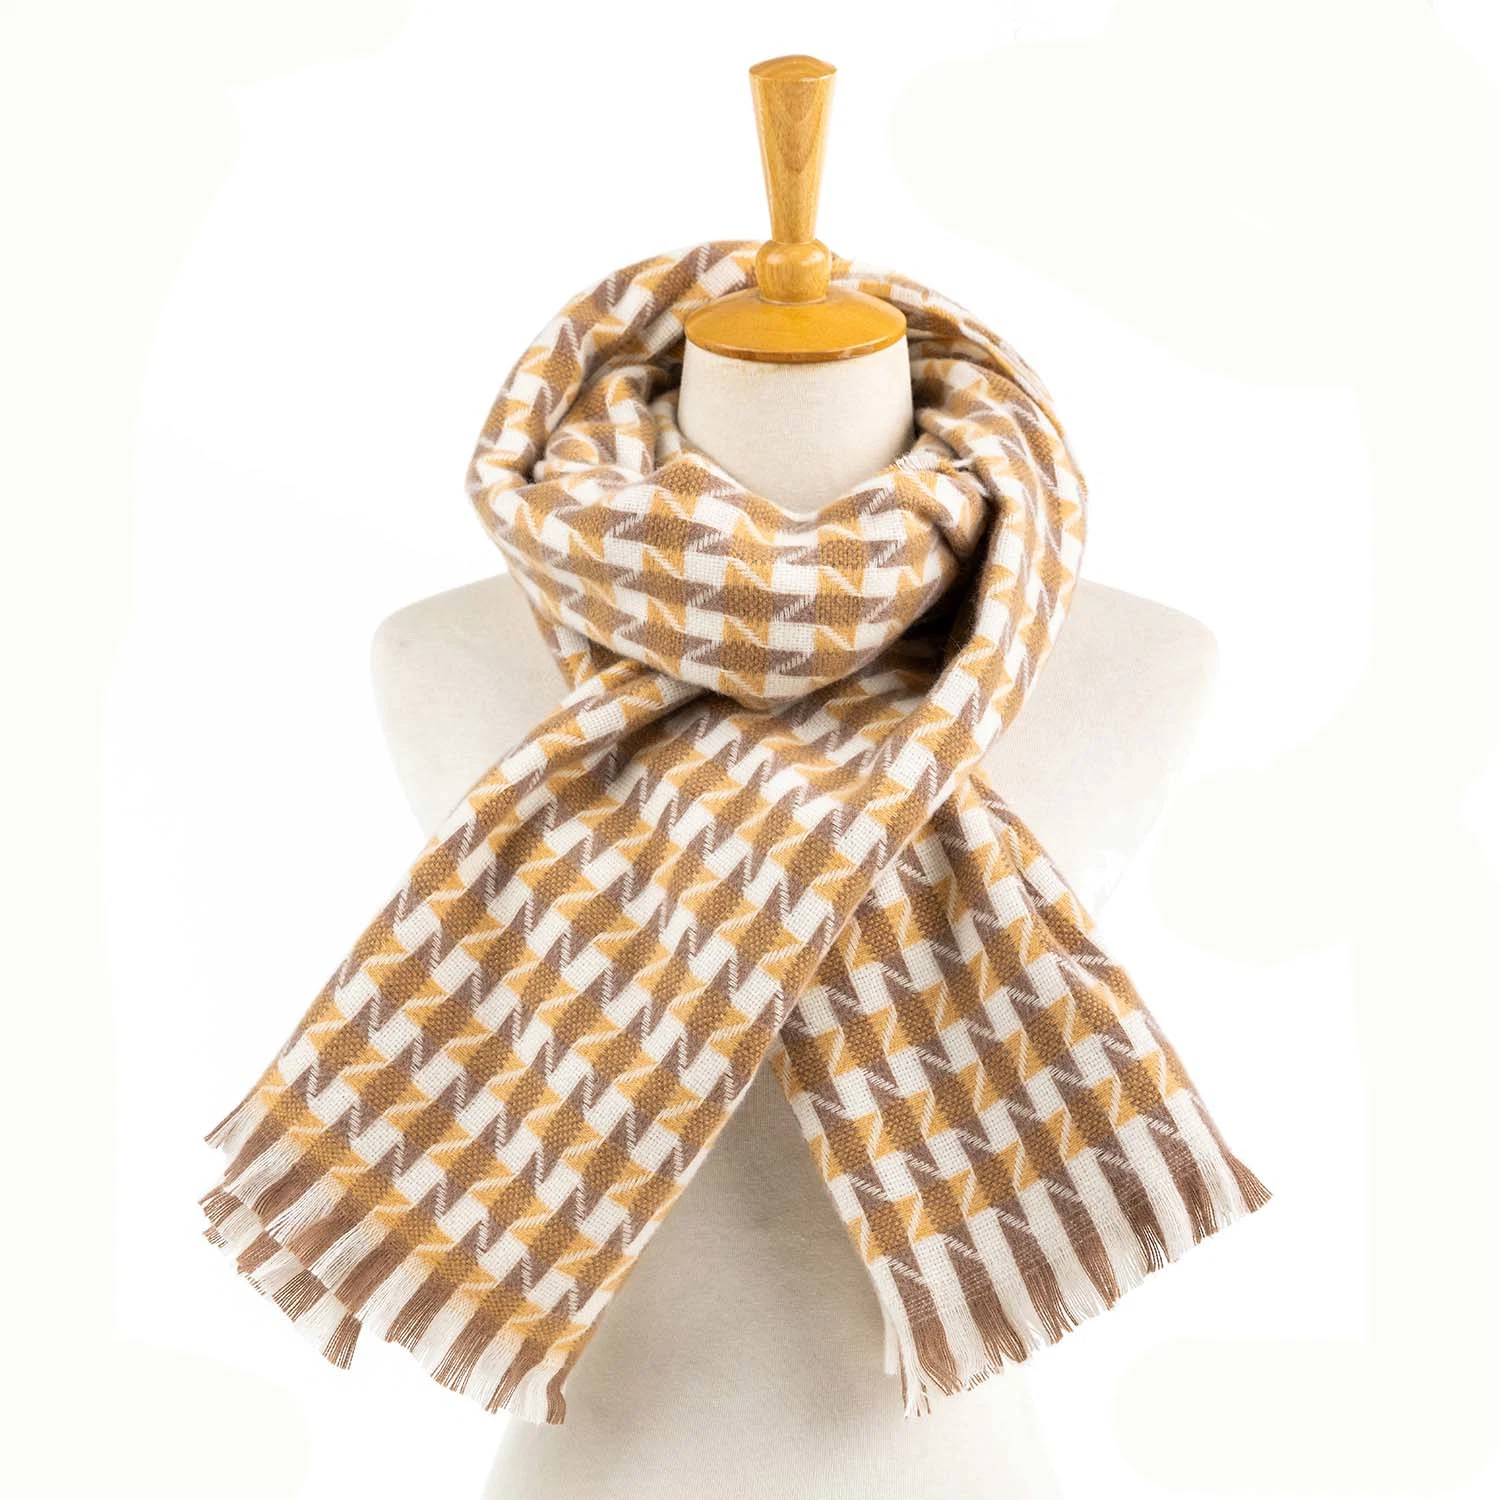 Wholesaler Outerwear Apparel Accessory Woman Winter Warm Camel Cashmere Feel Woven Tassel Grid Checks Stoles Shawl Pashmina Character Blanket Scarf